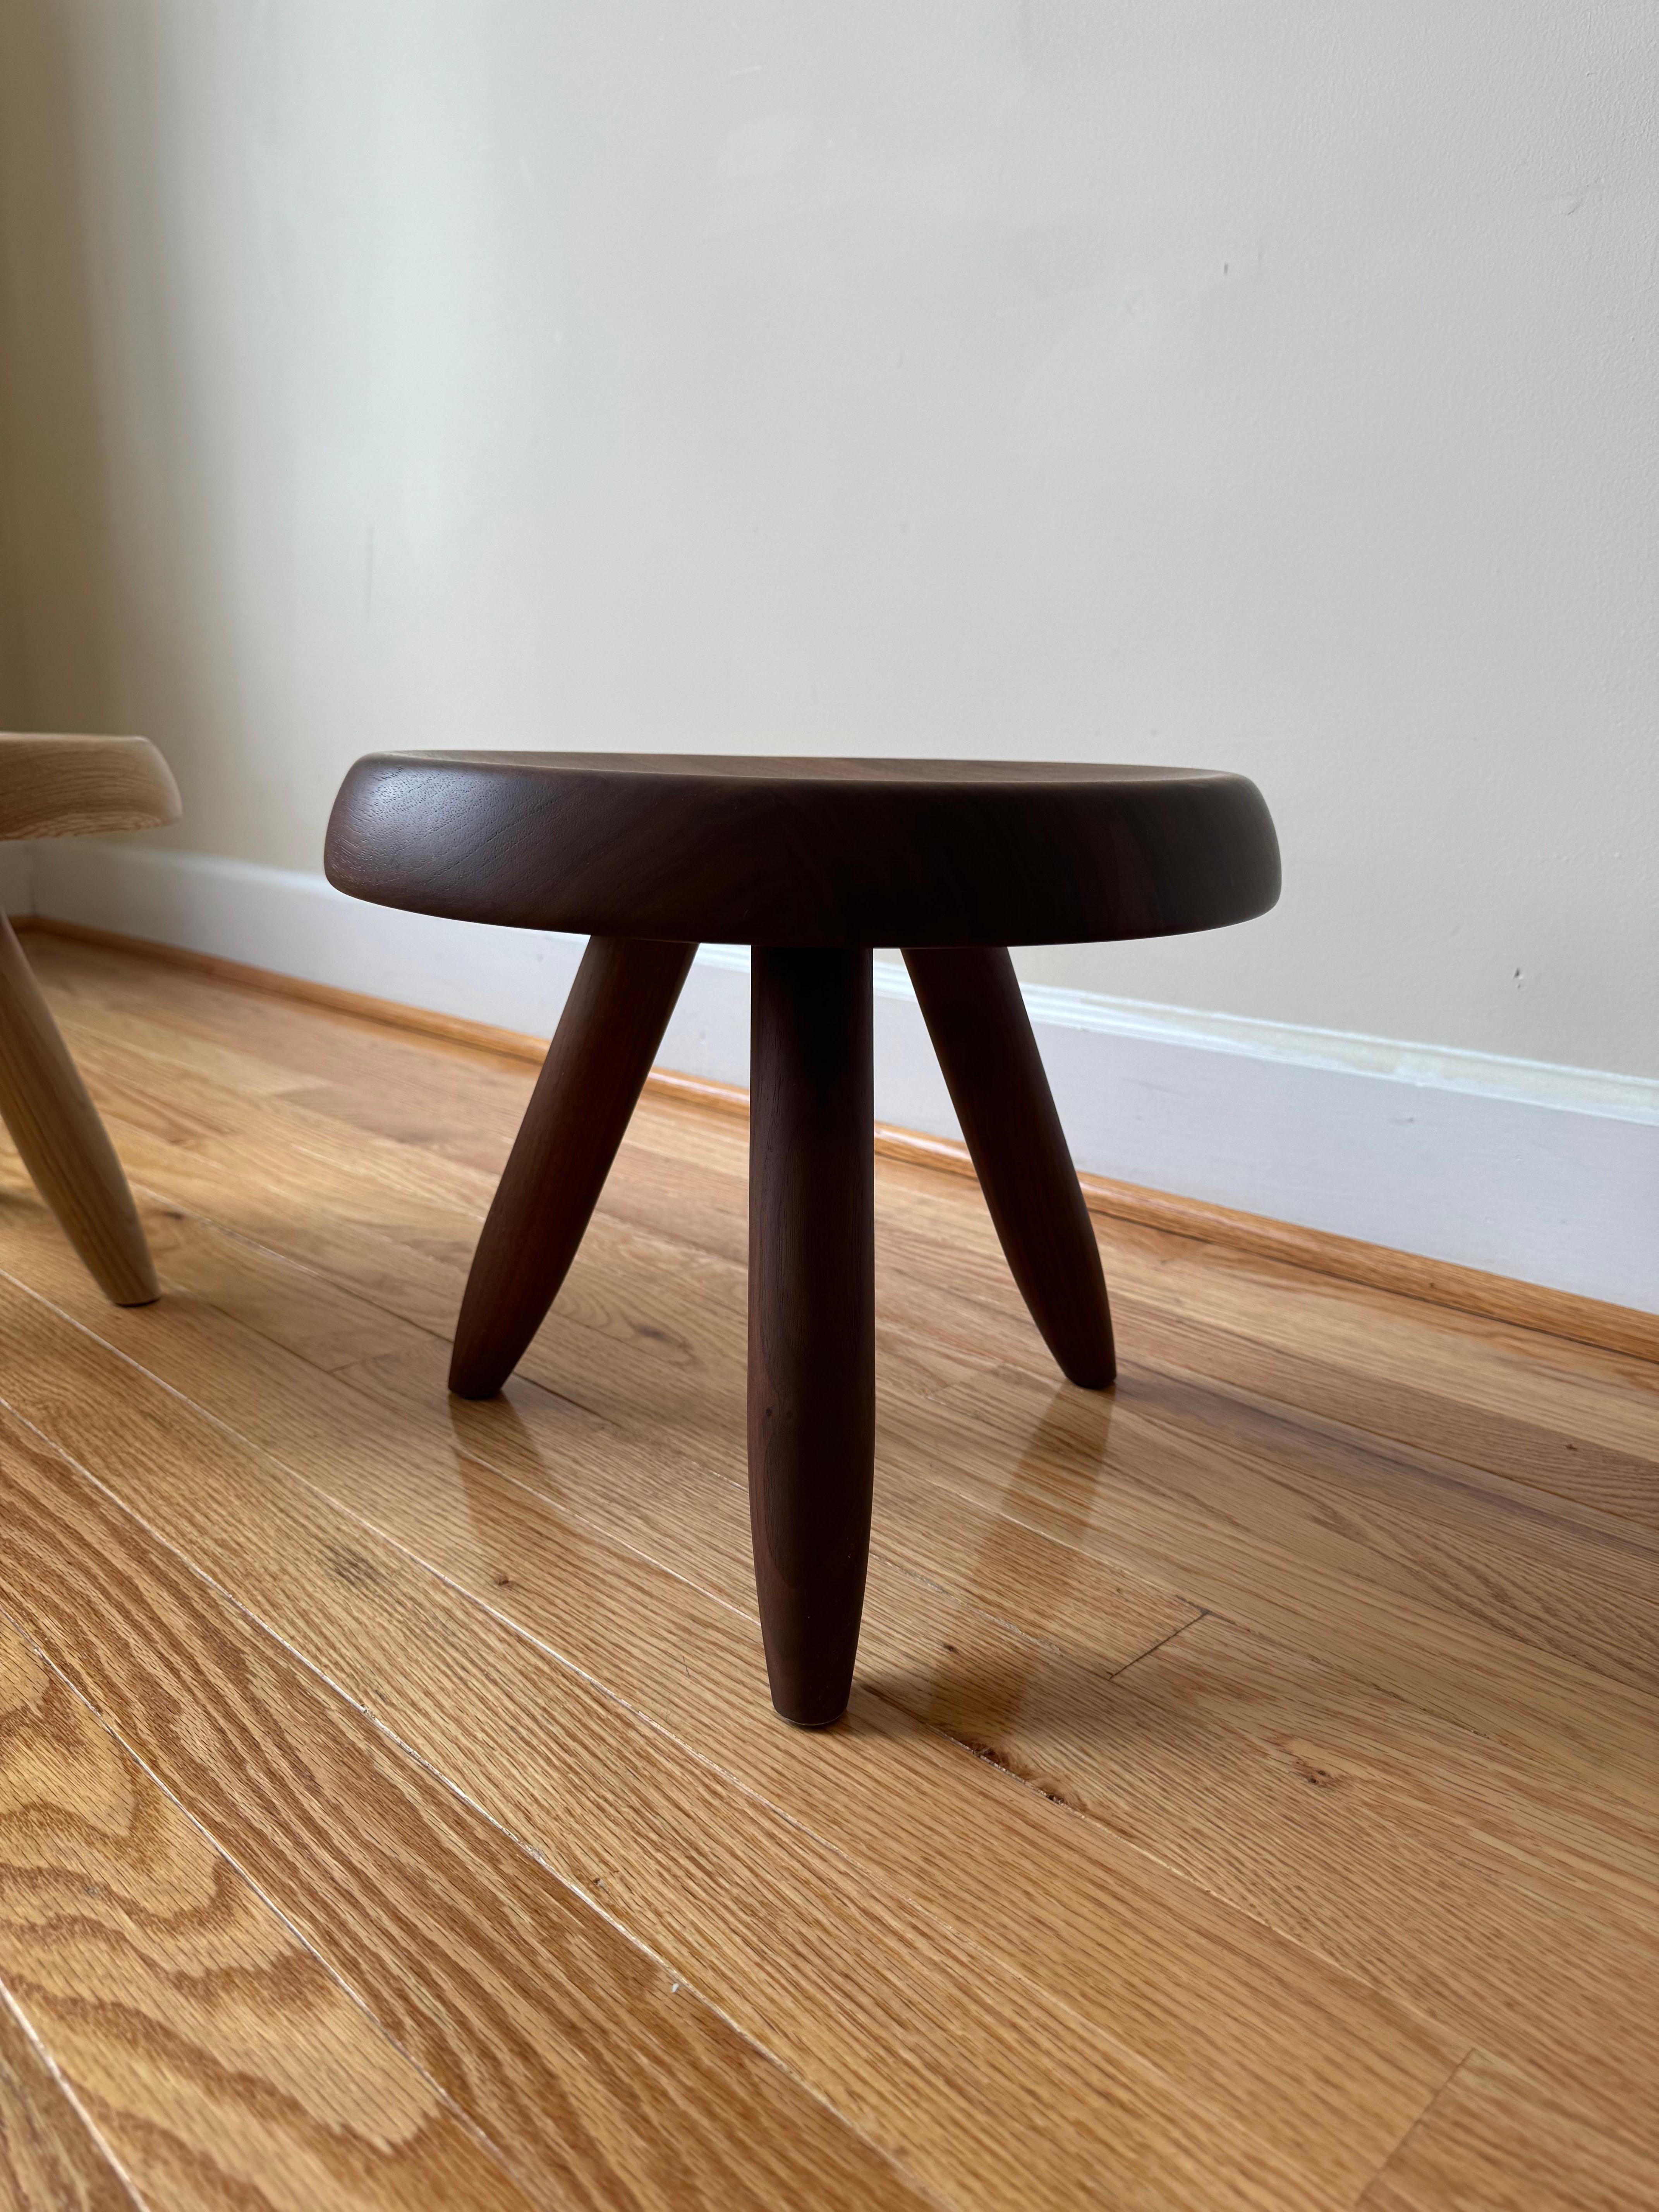 Mid-20th Century Tabouret Berger (Berger Stool) by Charlotte Perriand for Cassina For Sale